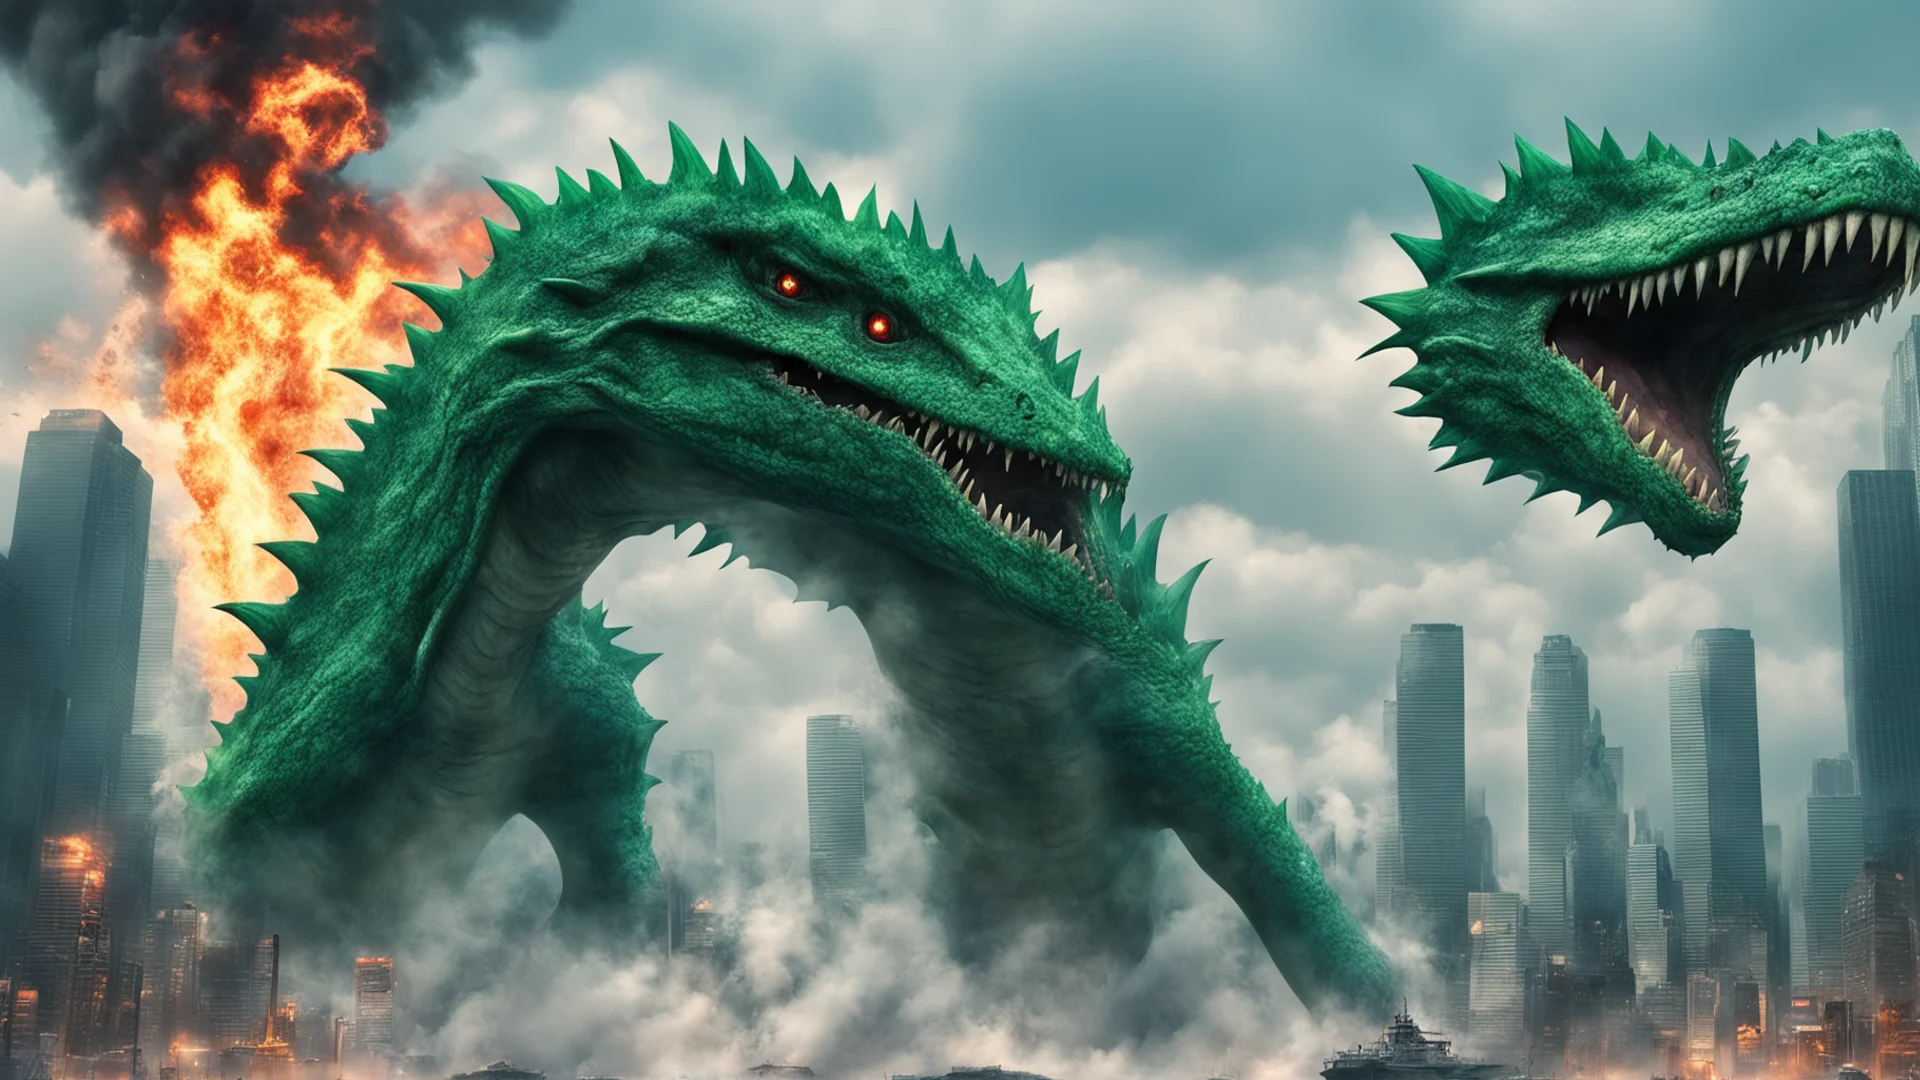 kaiju that has 1 long tail and that is a hybrid mosasaurus and has green fire coming out of its mouth destroying the city  wide